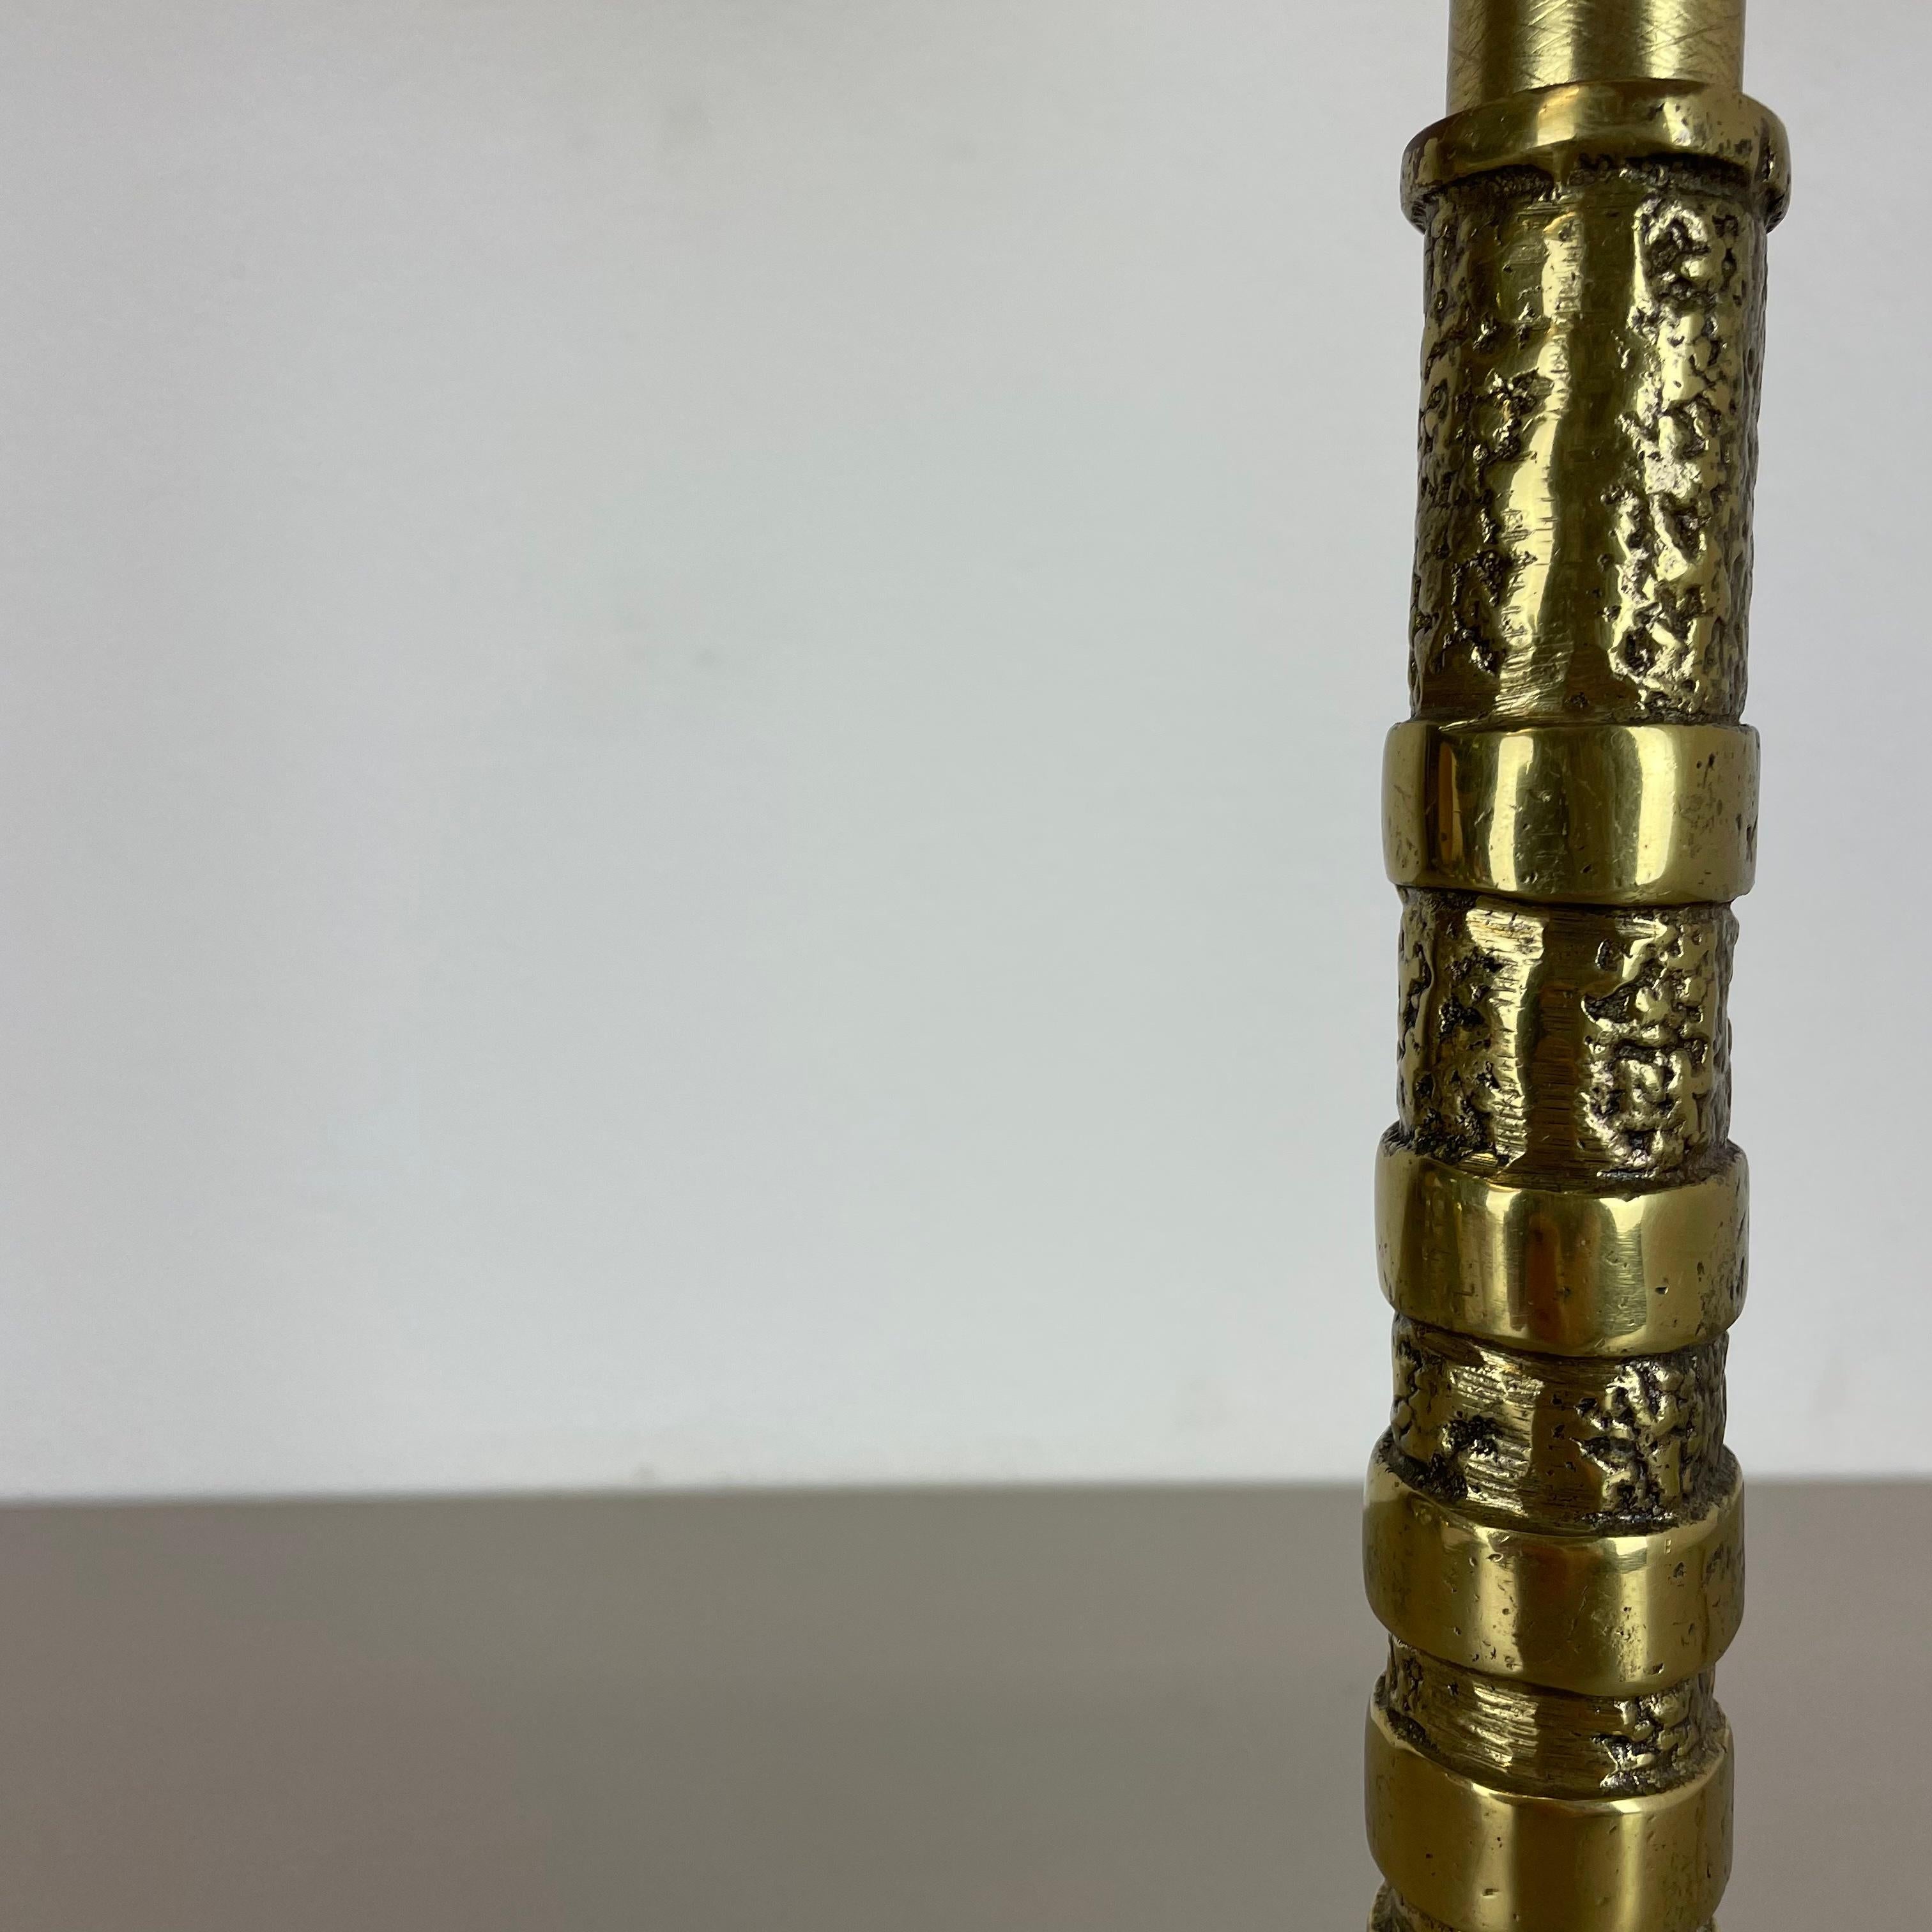 Original Hollywood Regency Style Floral Brutalist Brass Table Light, Italy 1970s For Sale 1